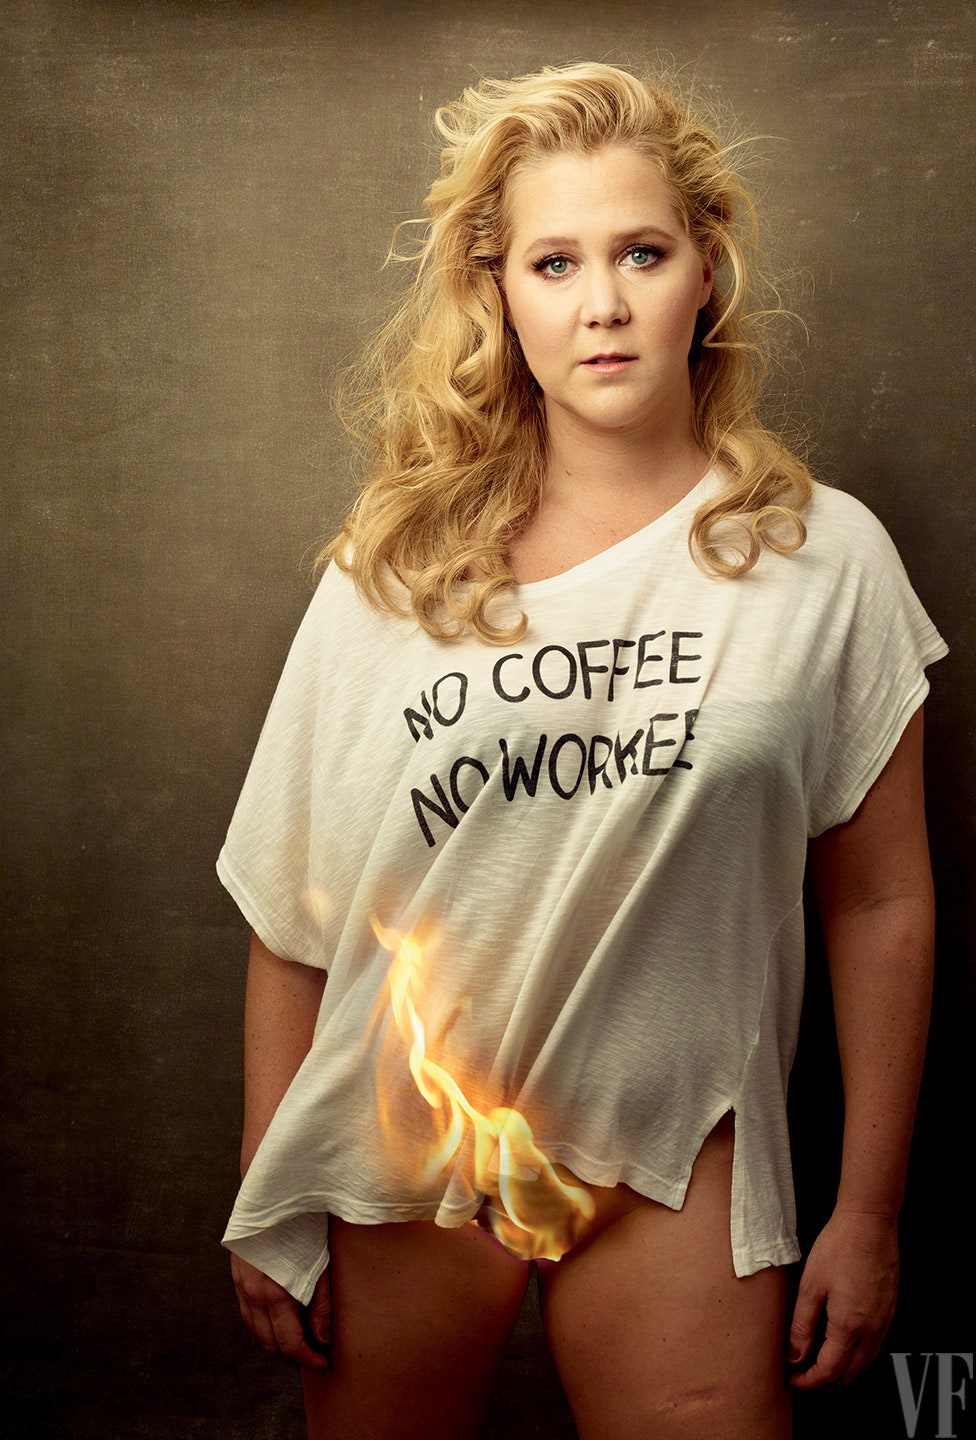 claire verhagen recommends amy schumer hot photos pic